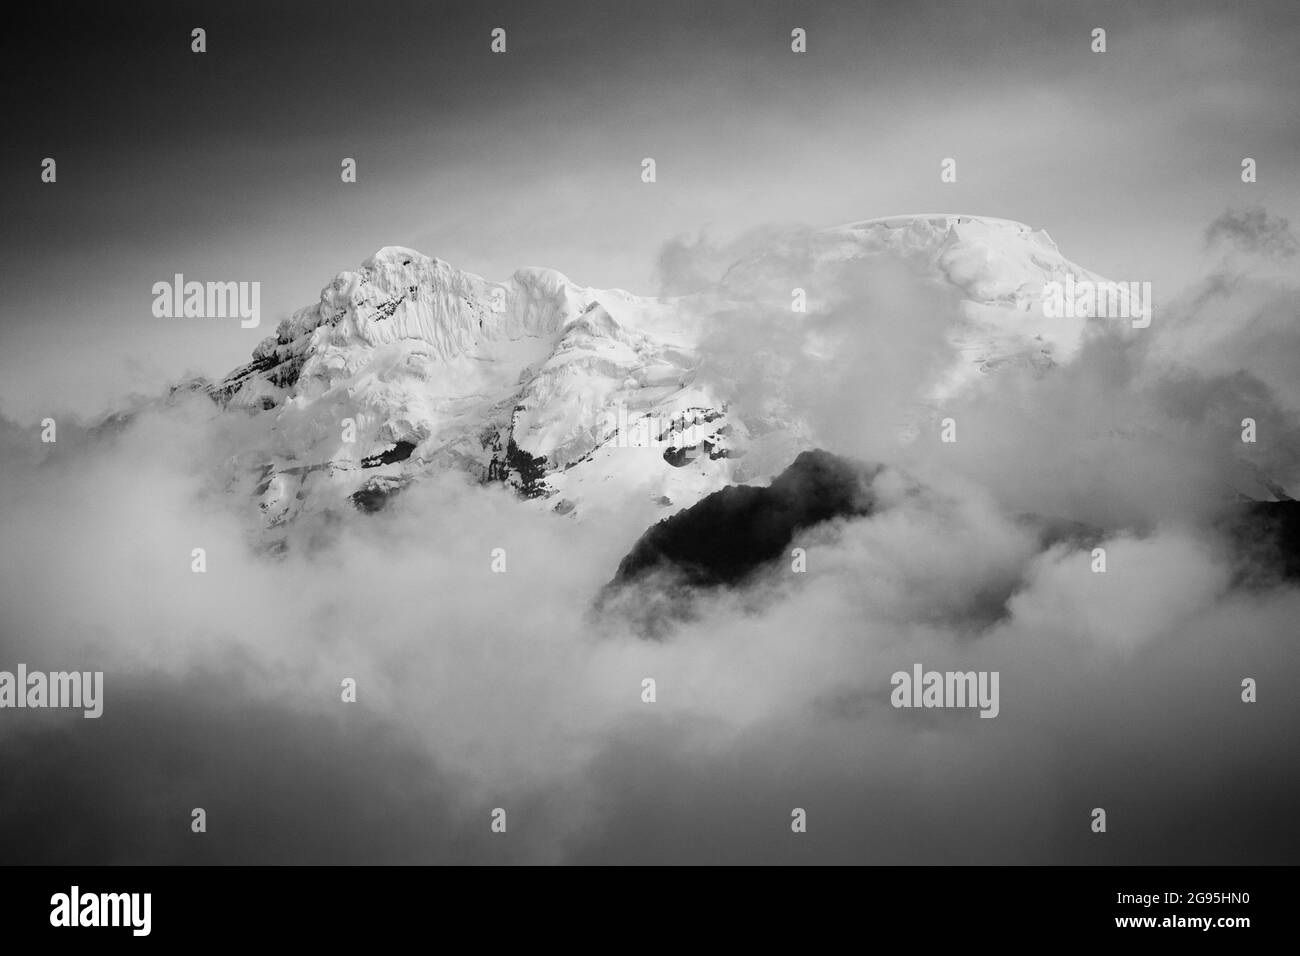 Grayscale shot of mountains covered in snow and clouds Stock Photo